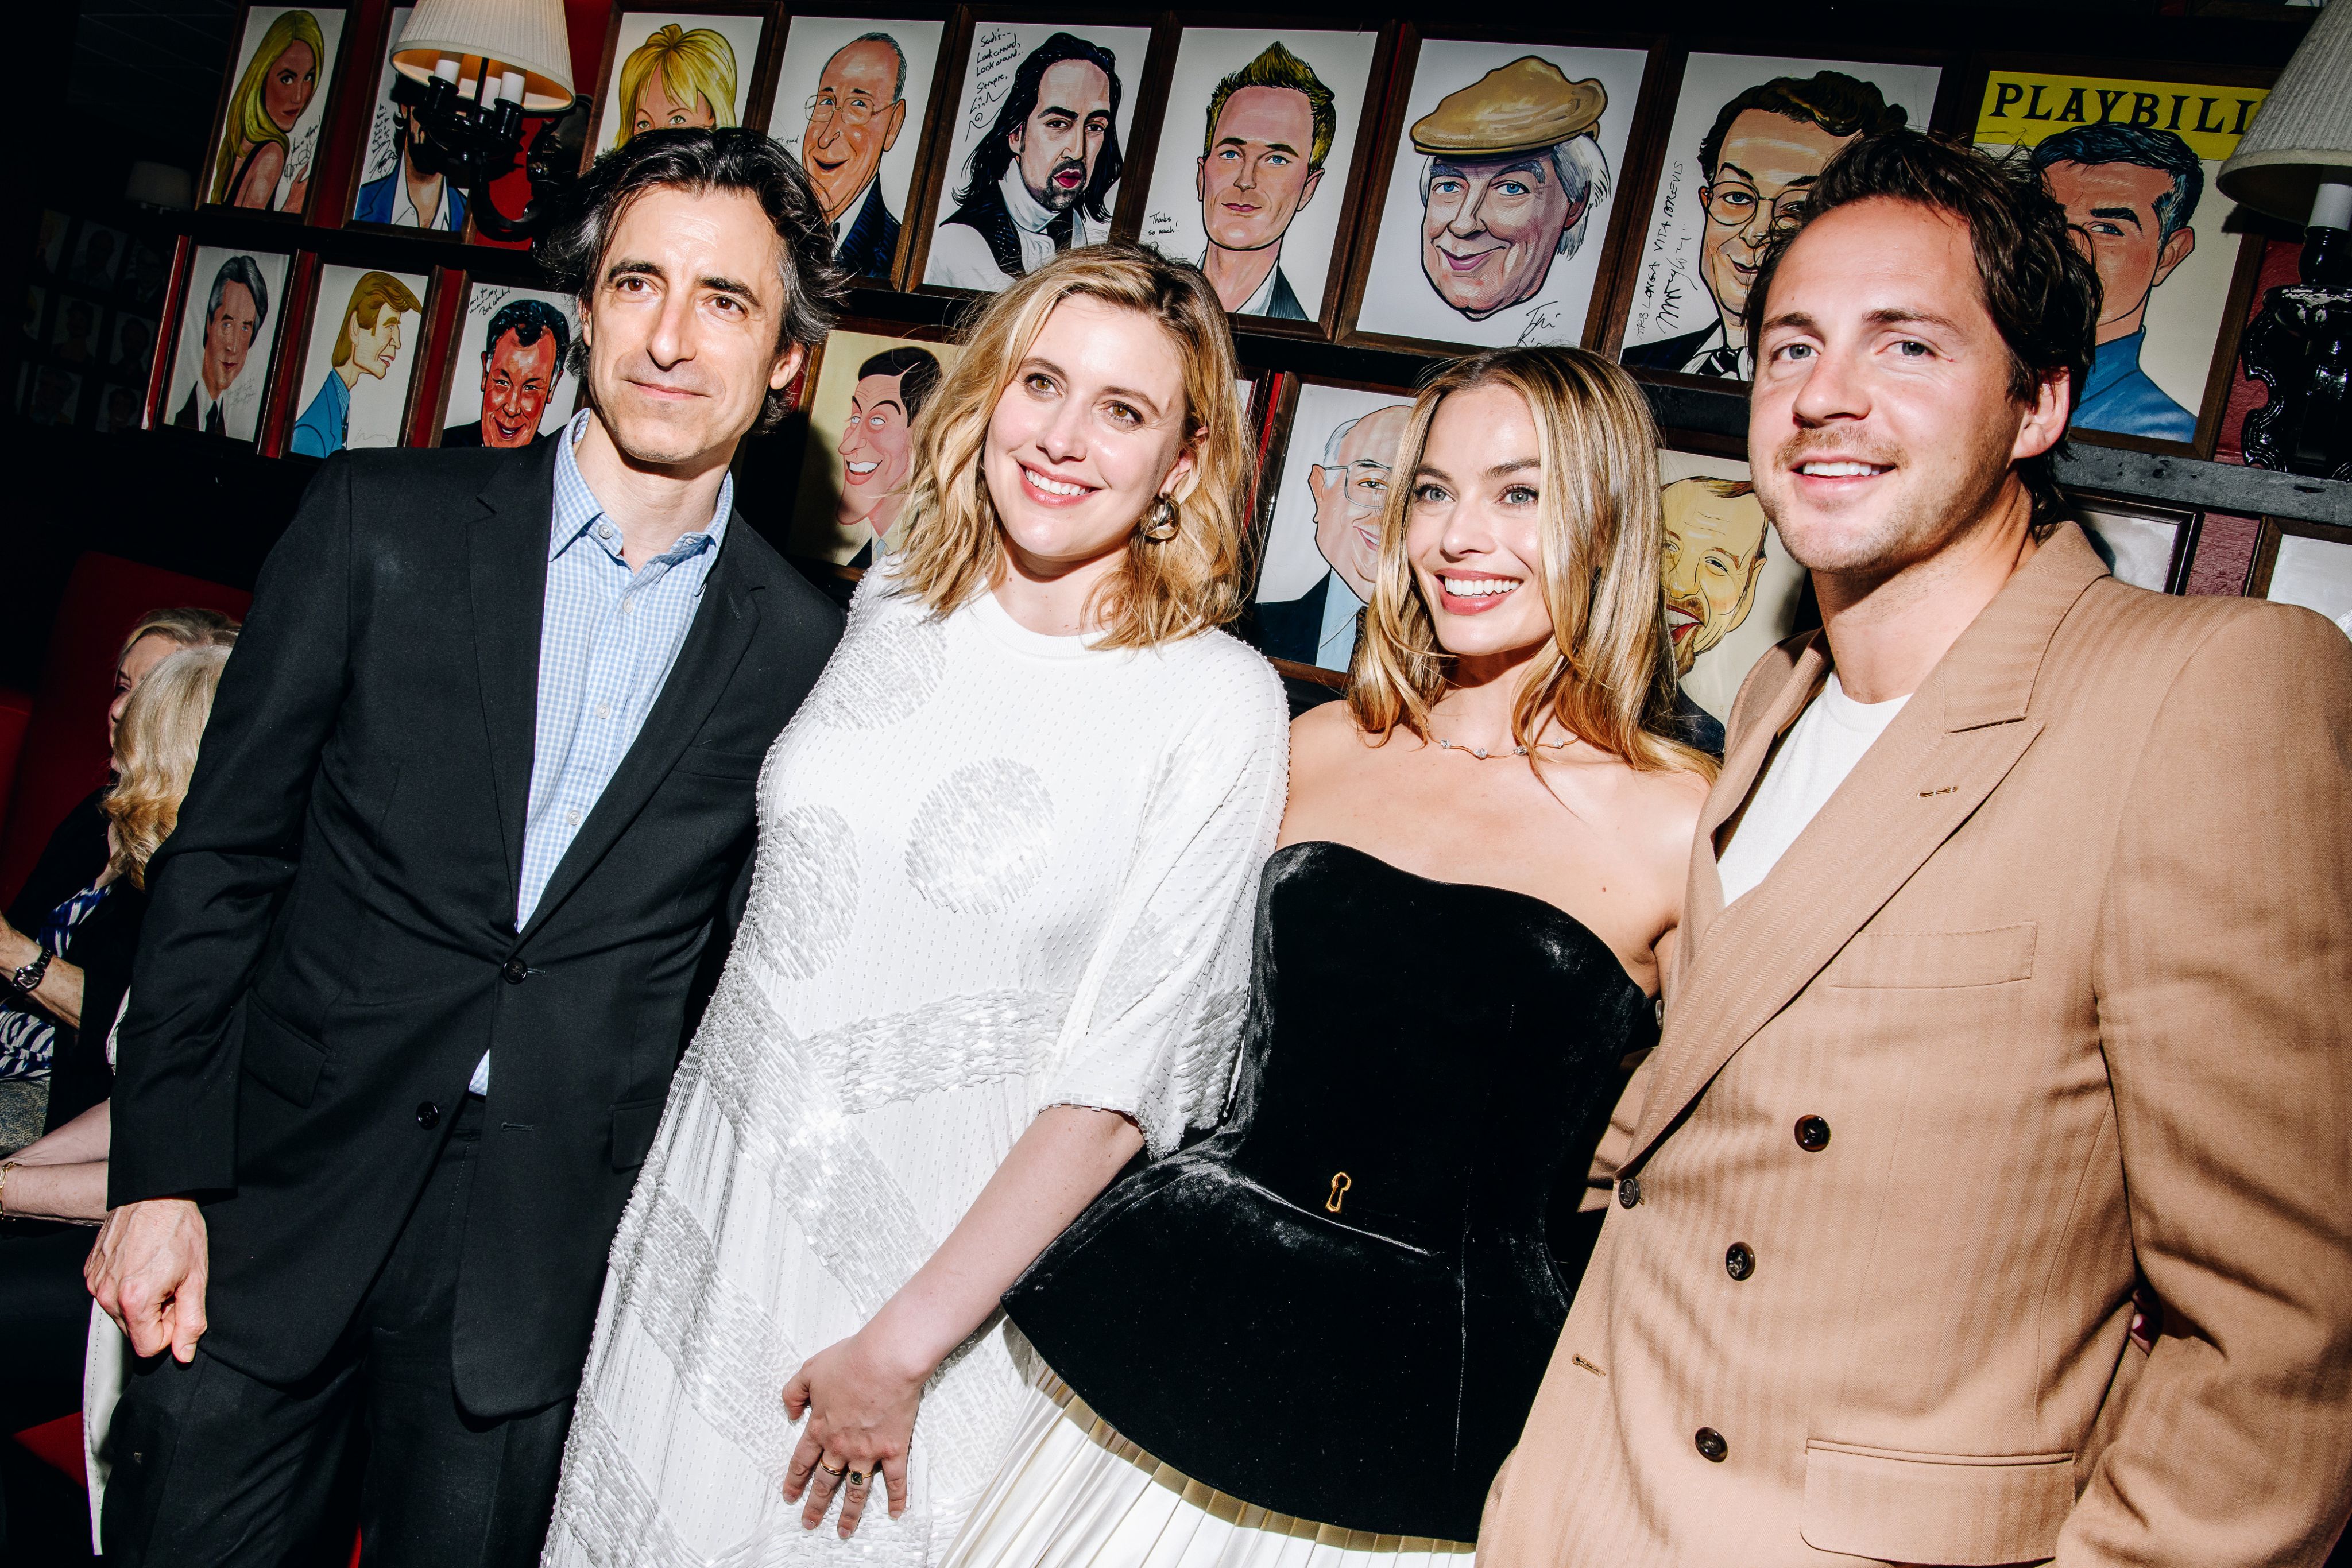 Noah Baumbach, Greta Gerwig, Margot Robbie and Tom Ackerley at the New York premiere of "Asteroid City" held at Alice Tully Hall on June 13, 2023 in New York City. (Photo by Nina Westervelt/Variety via Getty Images)